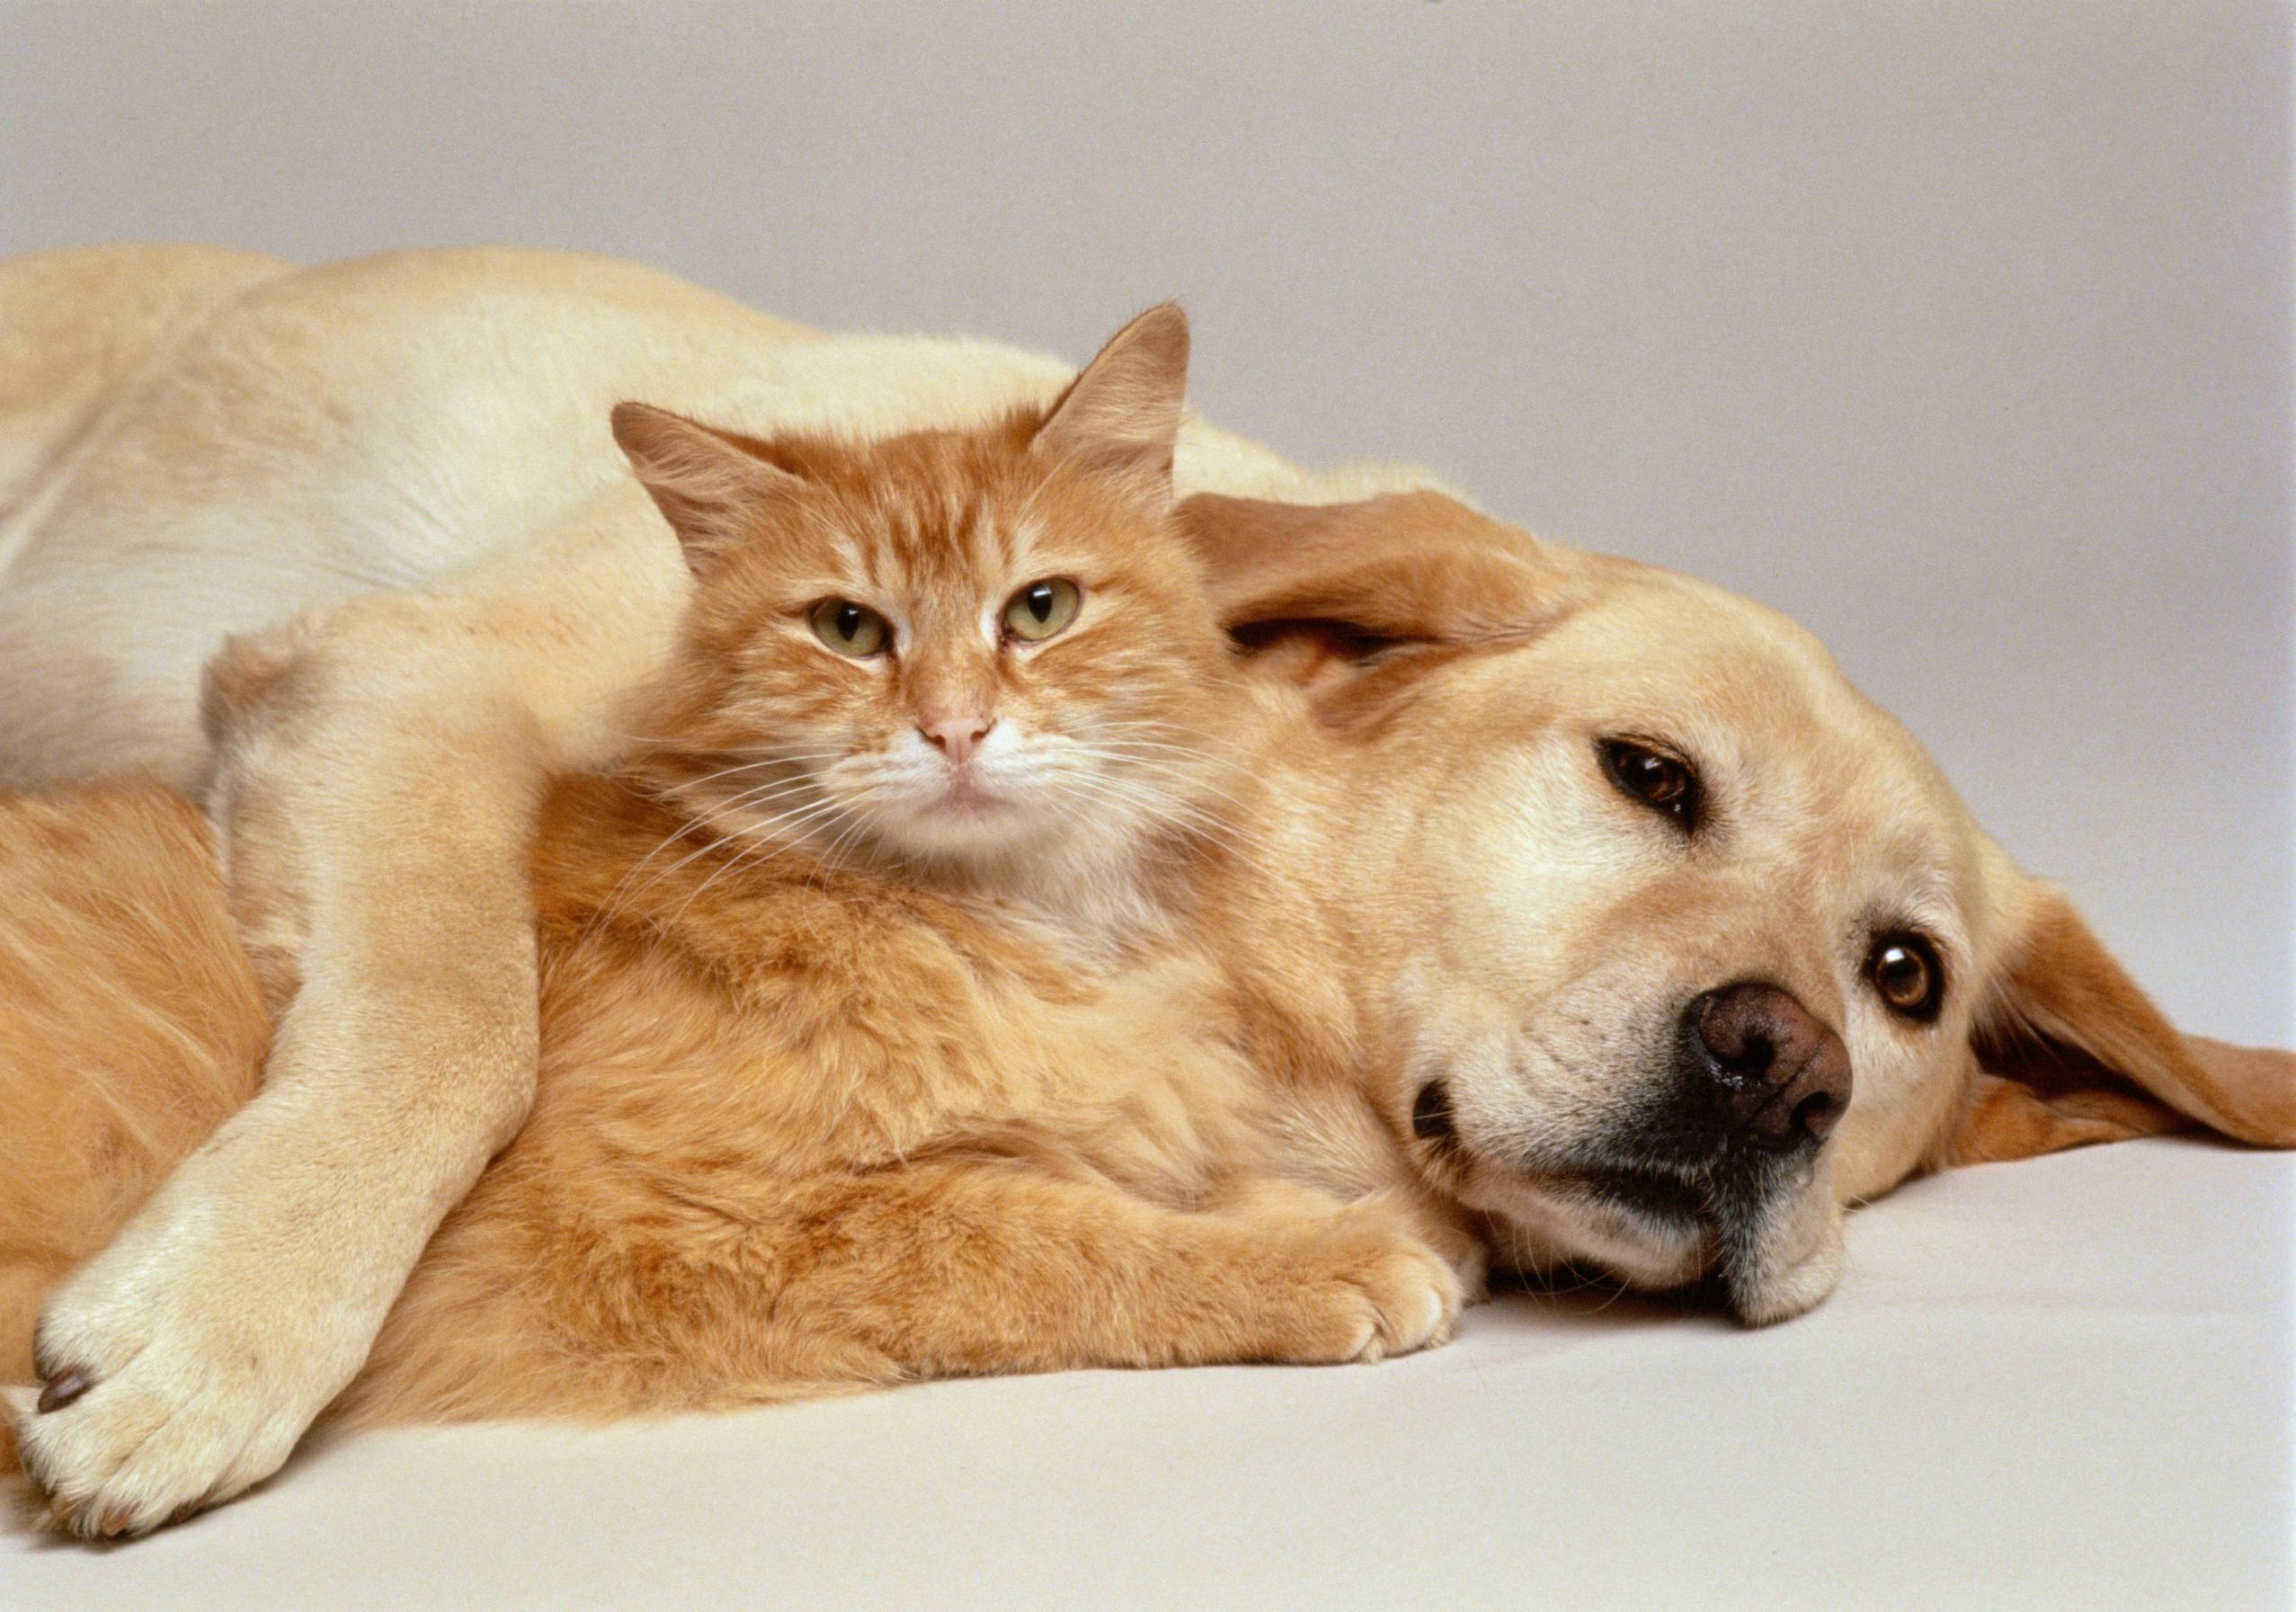 Wallpapers Of Cute Cats And Dogs Cat And Dog Wallpapers